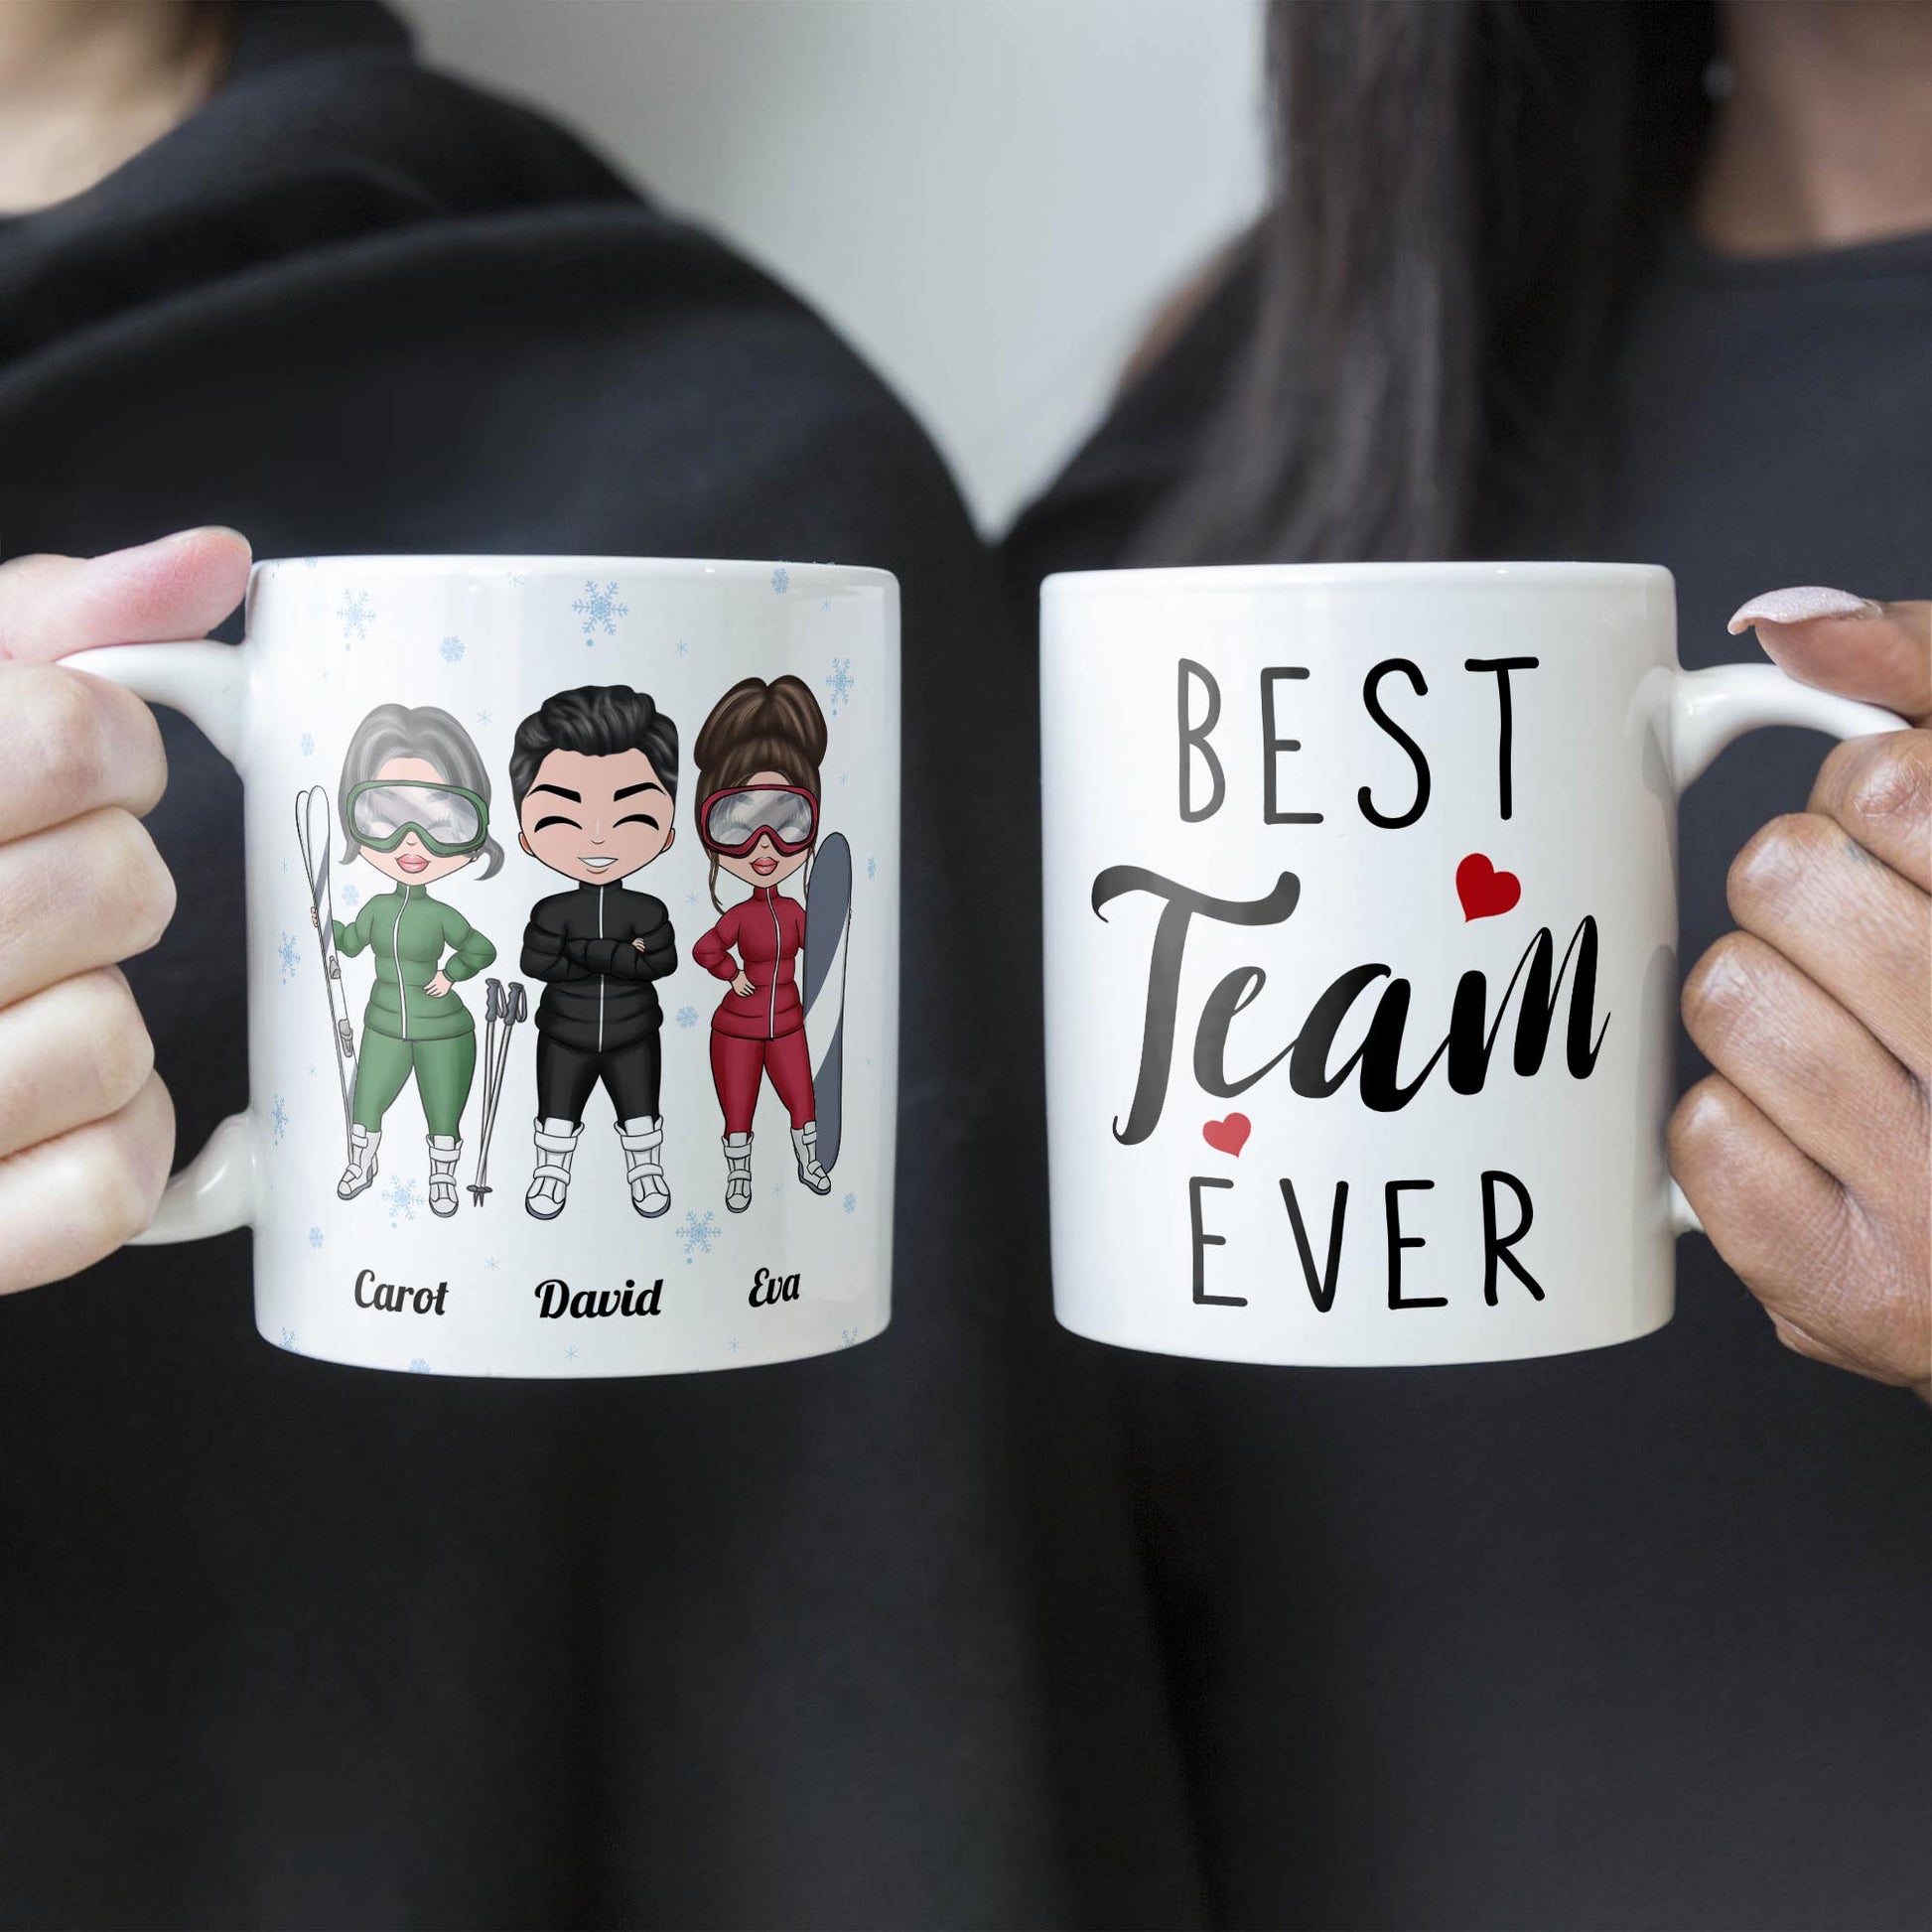 We Are A Team - Personalized Mug - Birthday Gift For Best Friends, Skiing Team, Skiing Lovers